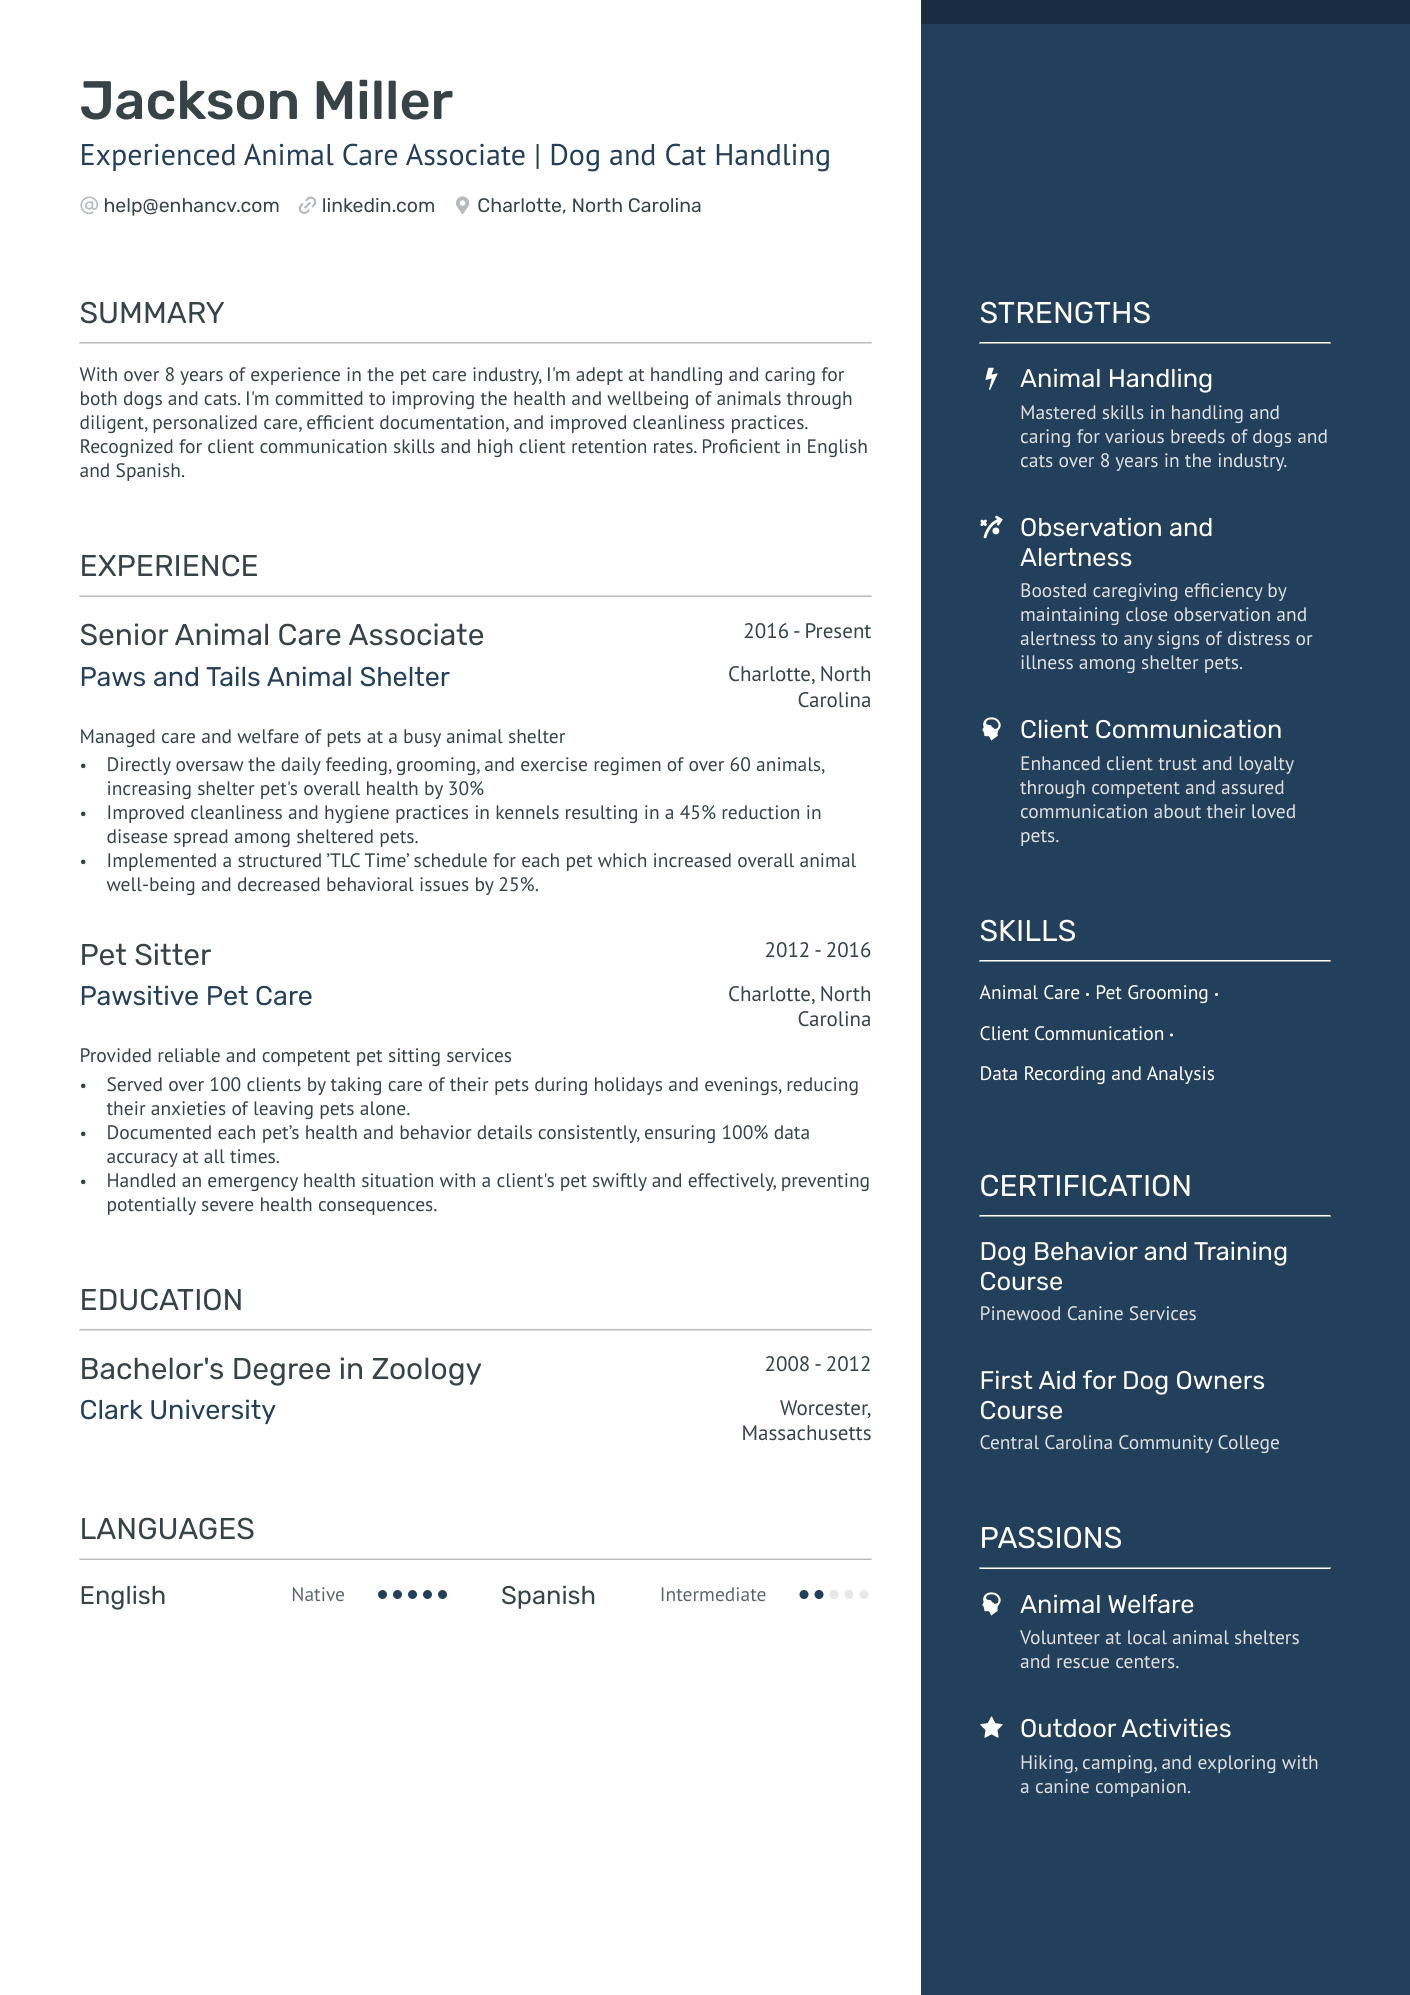 examples of caregiver resume